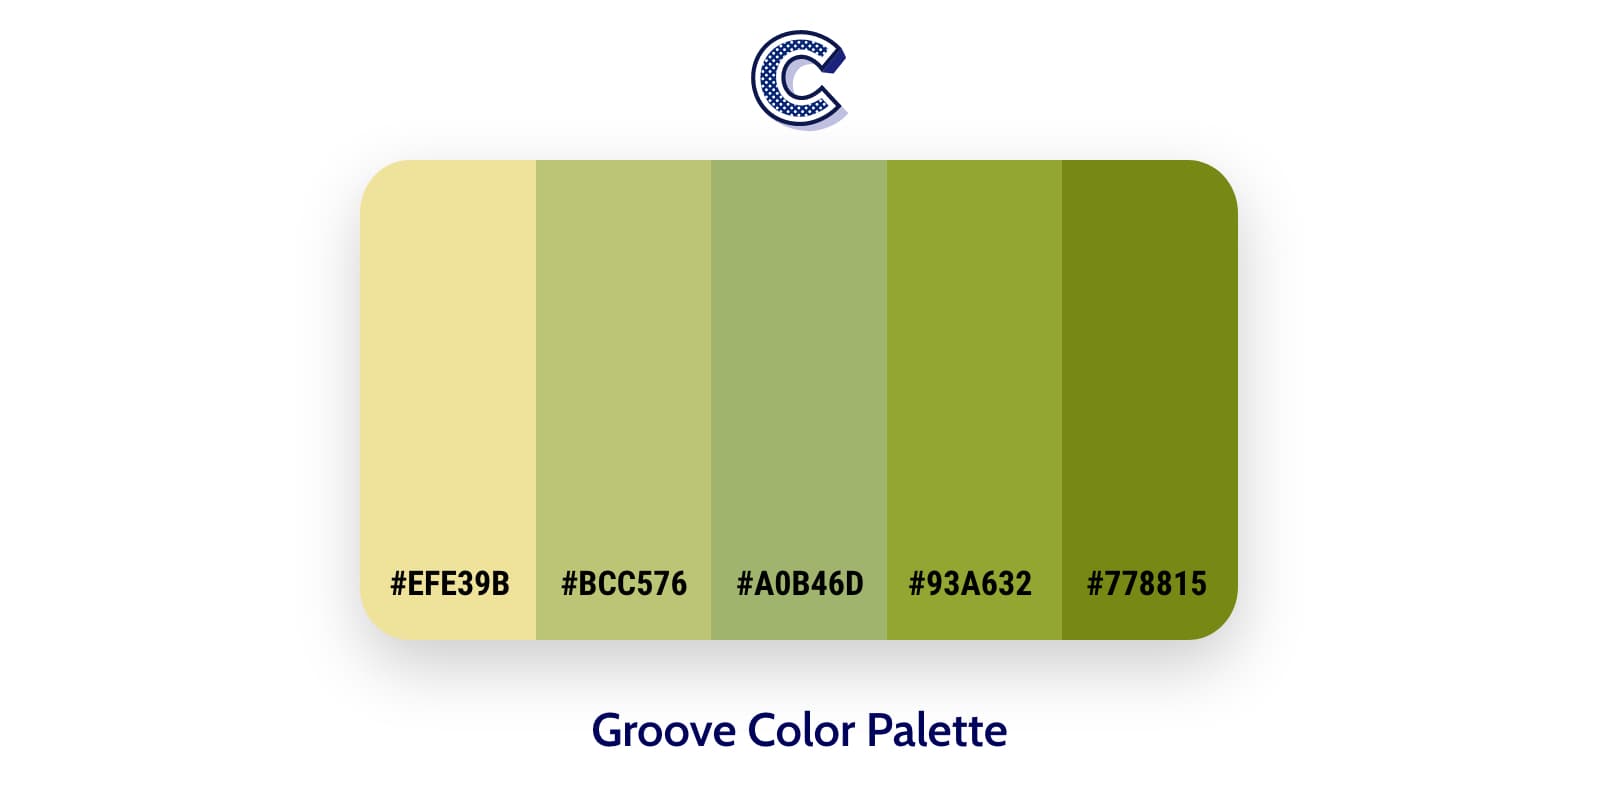 the featured image of groove color palette